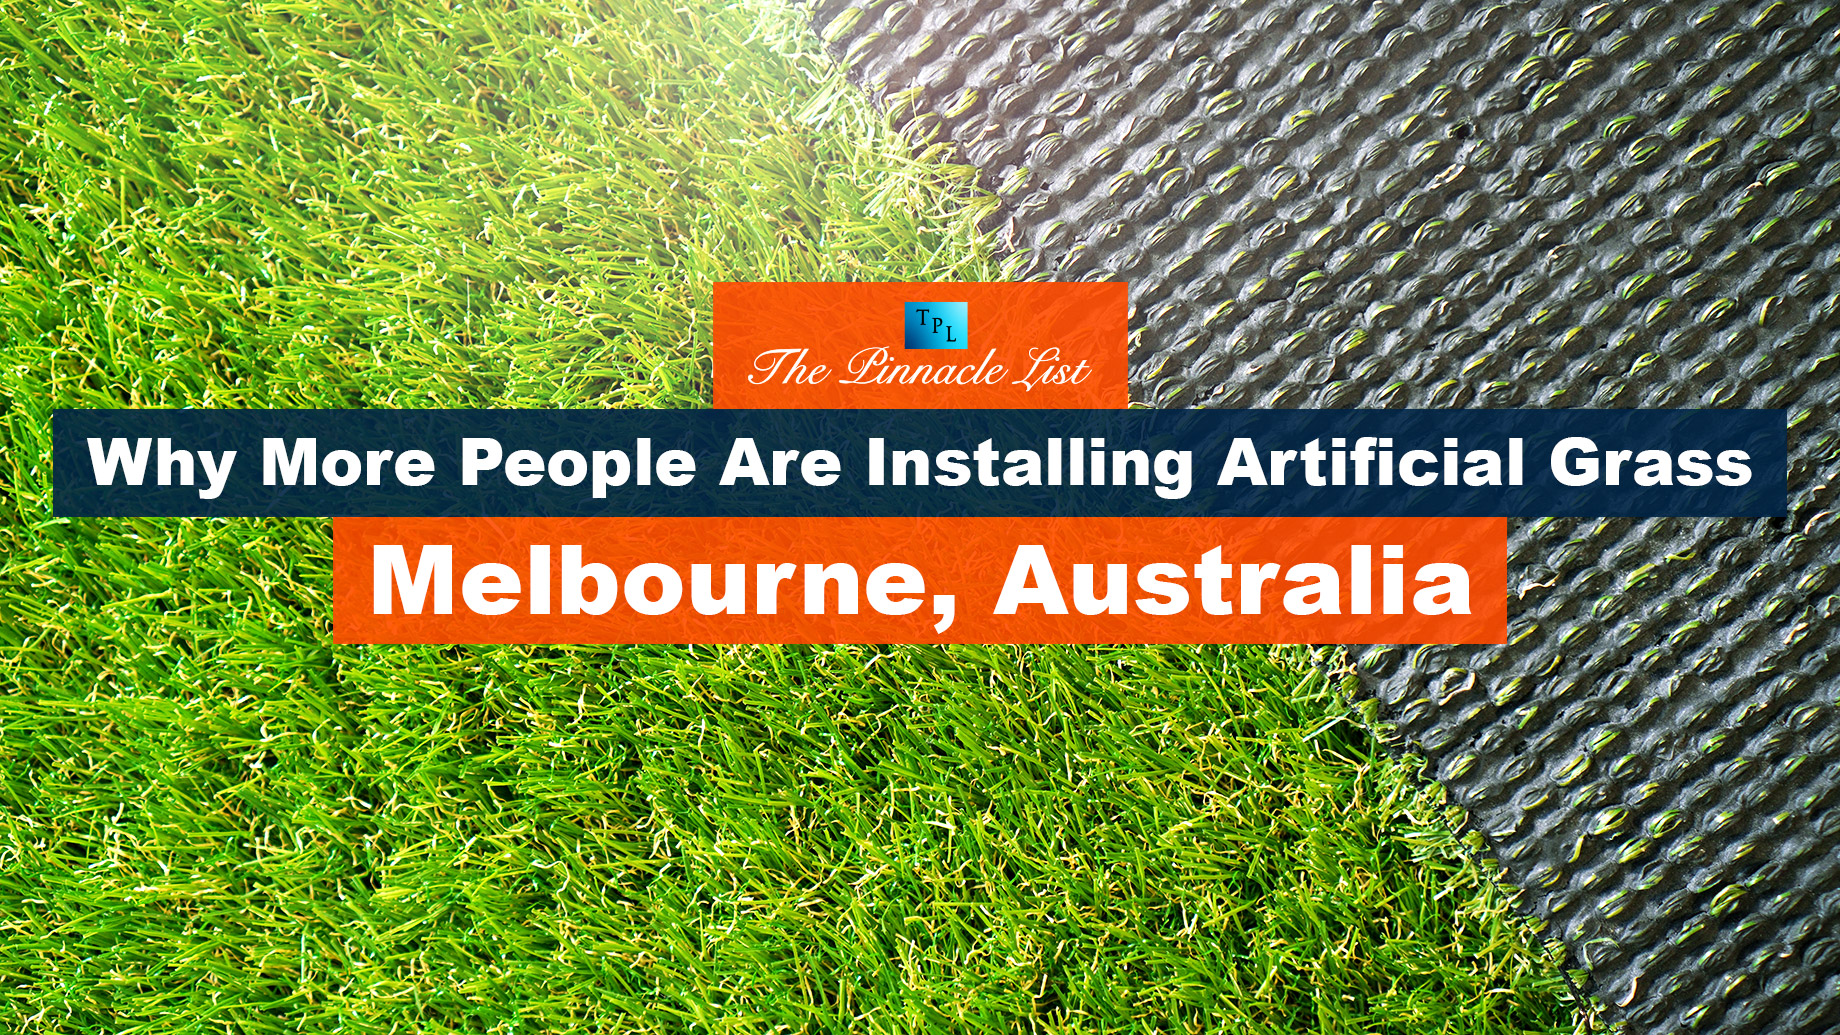 Why More People Are Installing Artificial Grass In Melbourne, Australia